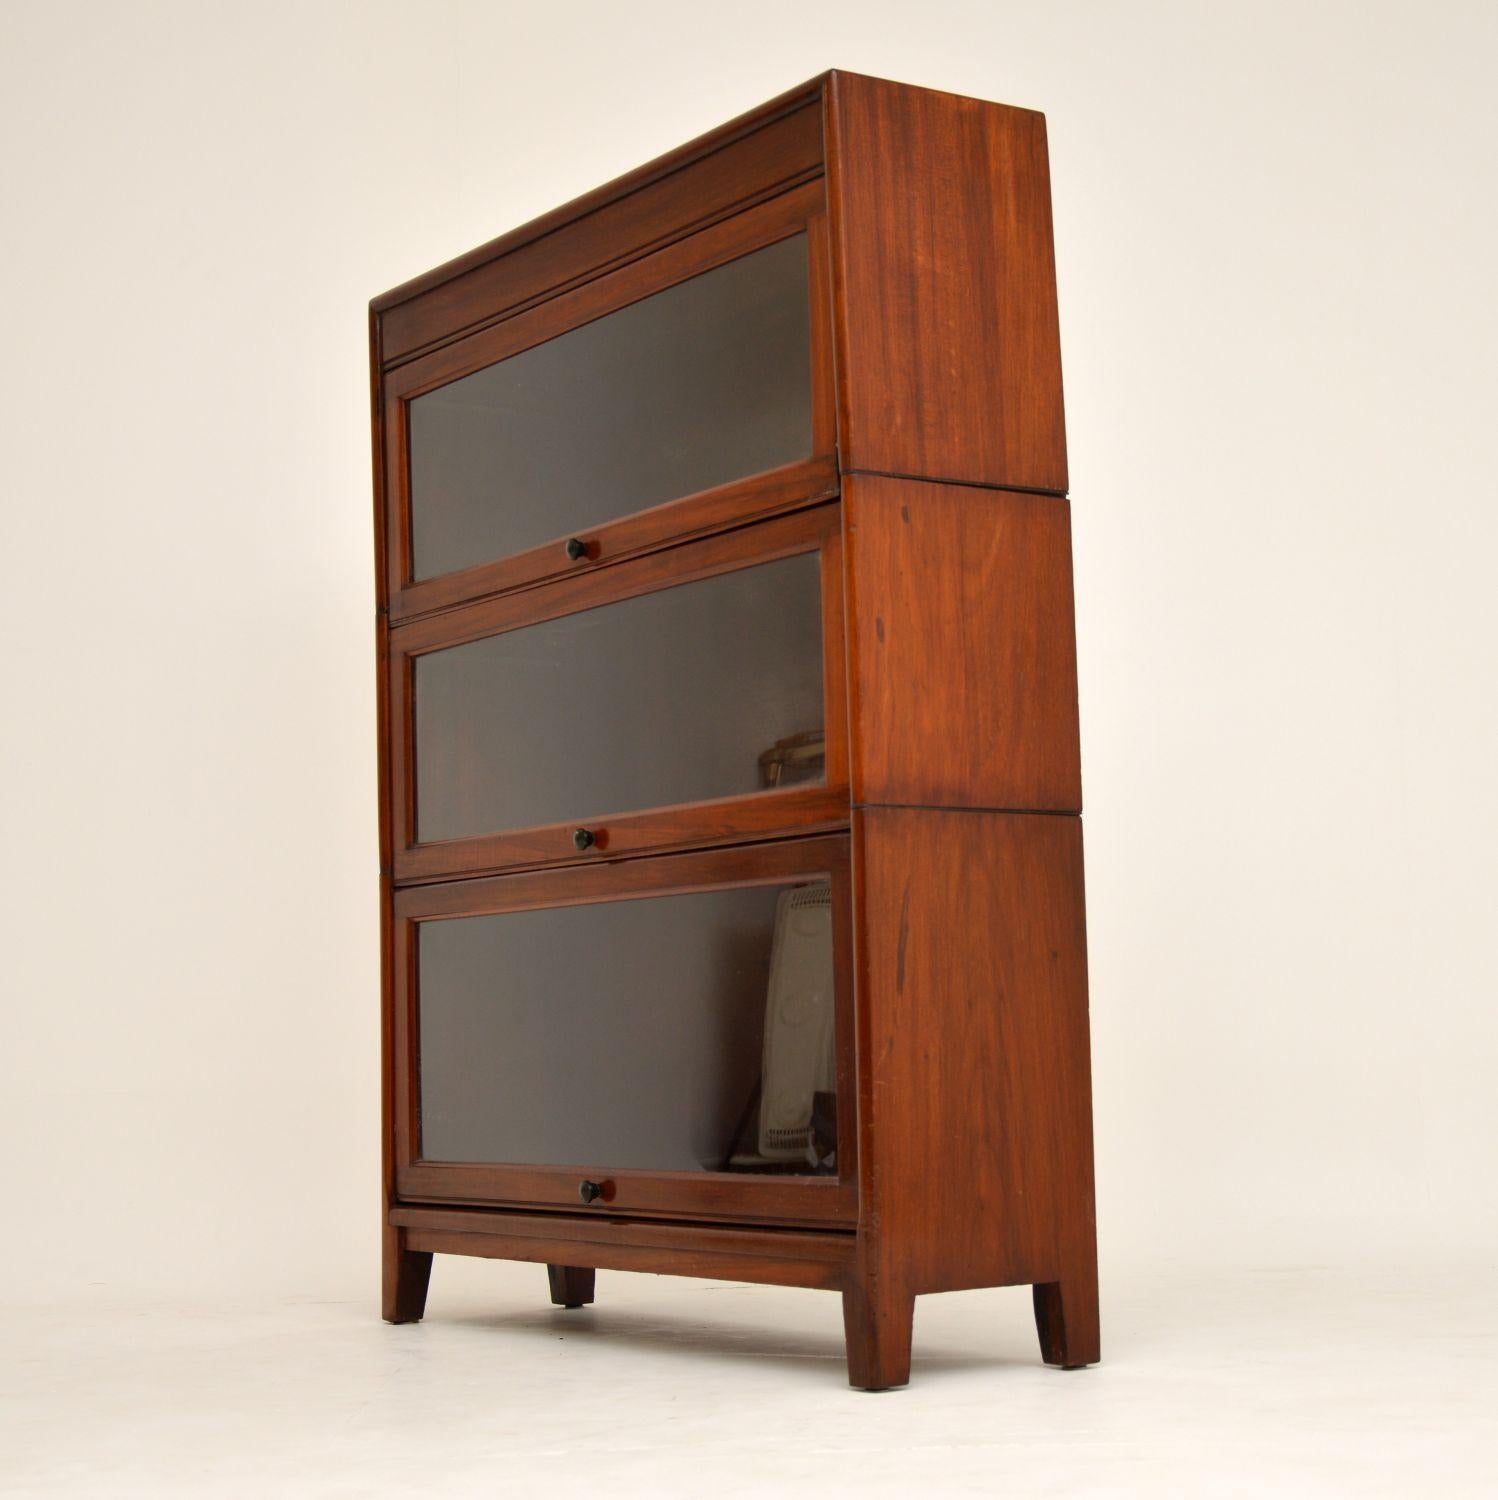 Antique mahogany stacking bookcase, which comes apart into three sections for easy transportation. It dates from the 1920s period and is in excellent condition. As you can see, the glass fronted doors lift up and simply slide back to allow good